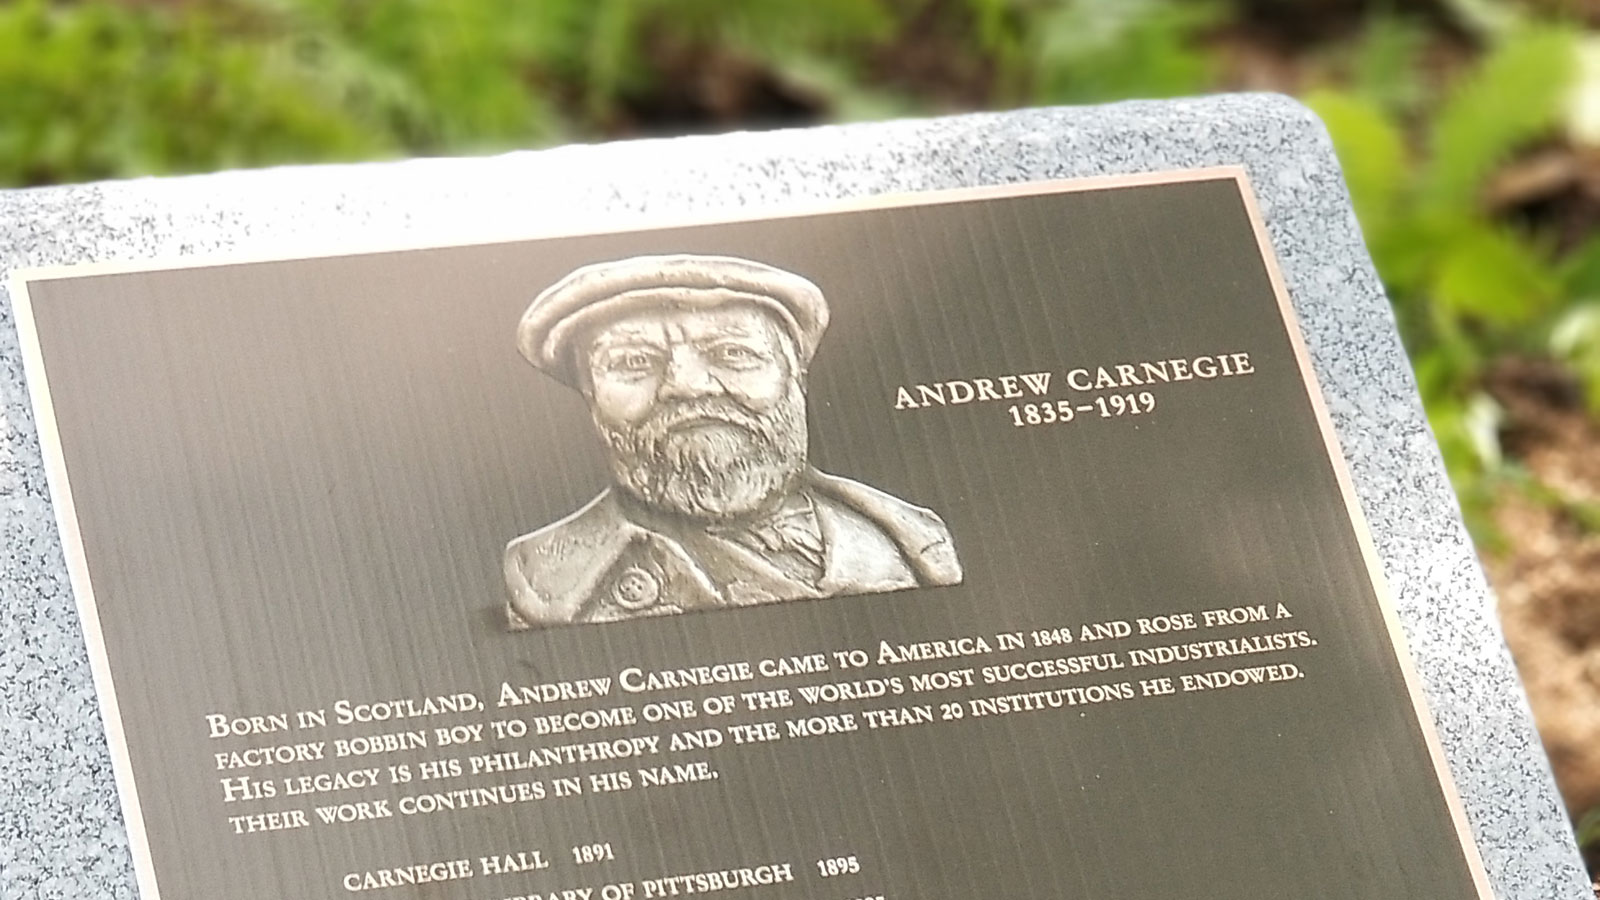 A new plaque commemorating the many institutions founded by Andrew Carnegie was unveiled at the wreath laying ceremony in Sleepy Hollow, New York, at the entrance to Carnegie’s grave site